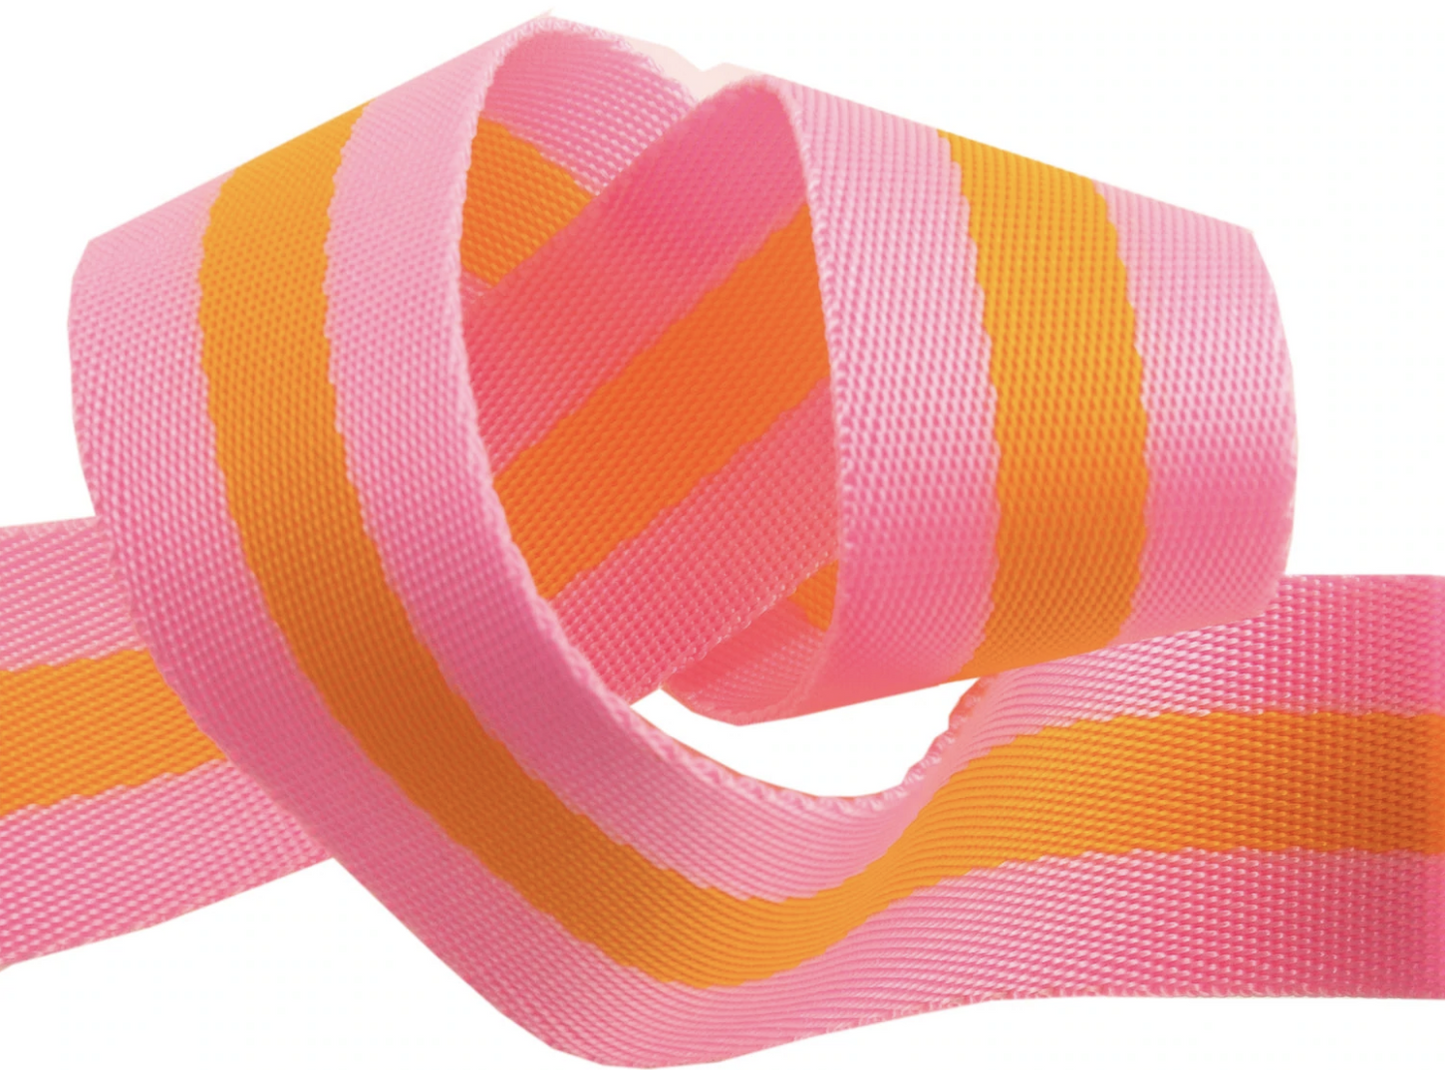 Tula Pink Webbing 2yd x 1in-Pink and Orange